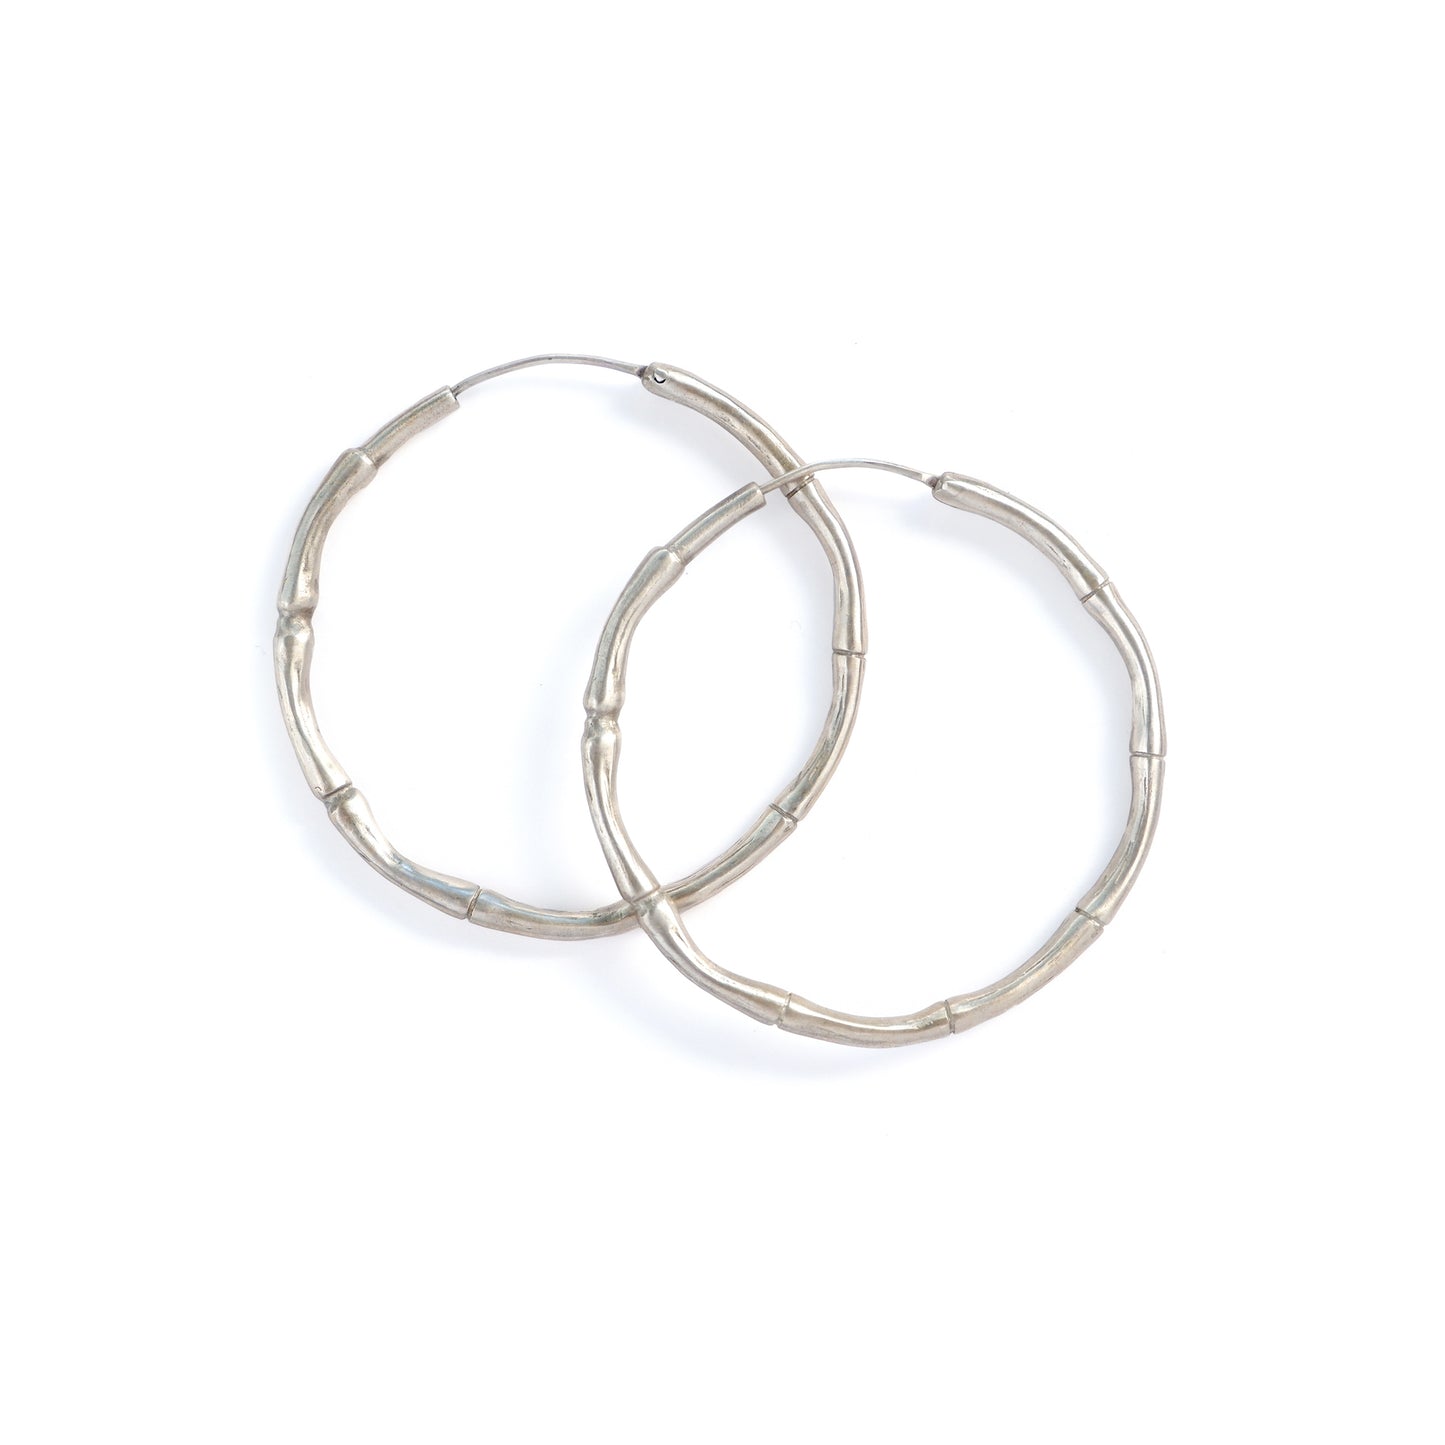 Bamboo Hoops medium size, solid sterling silver hula hoops